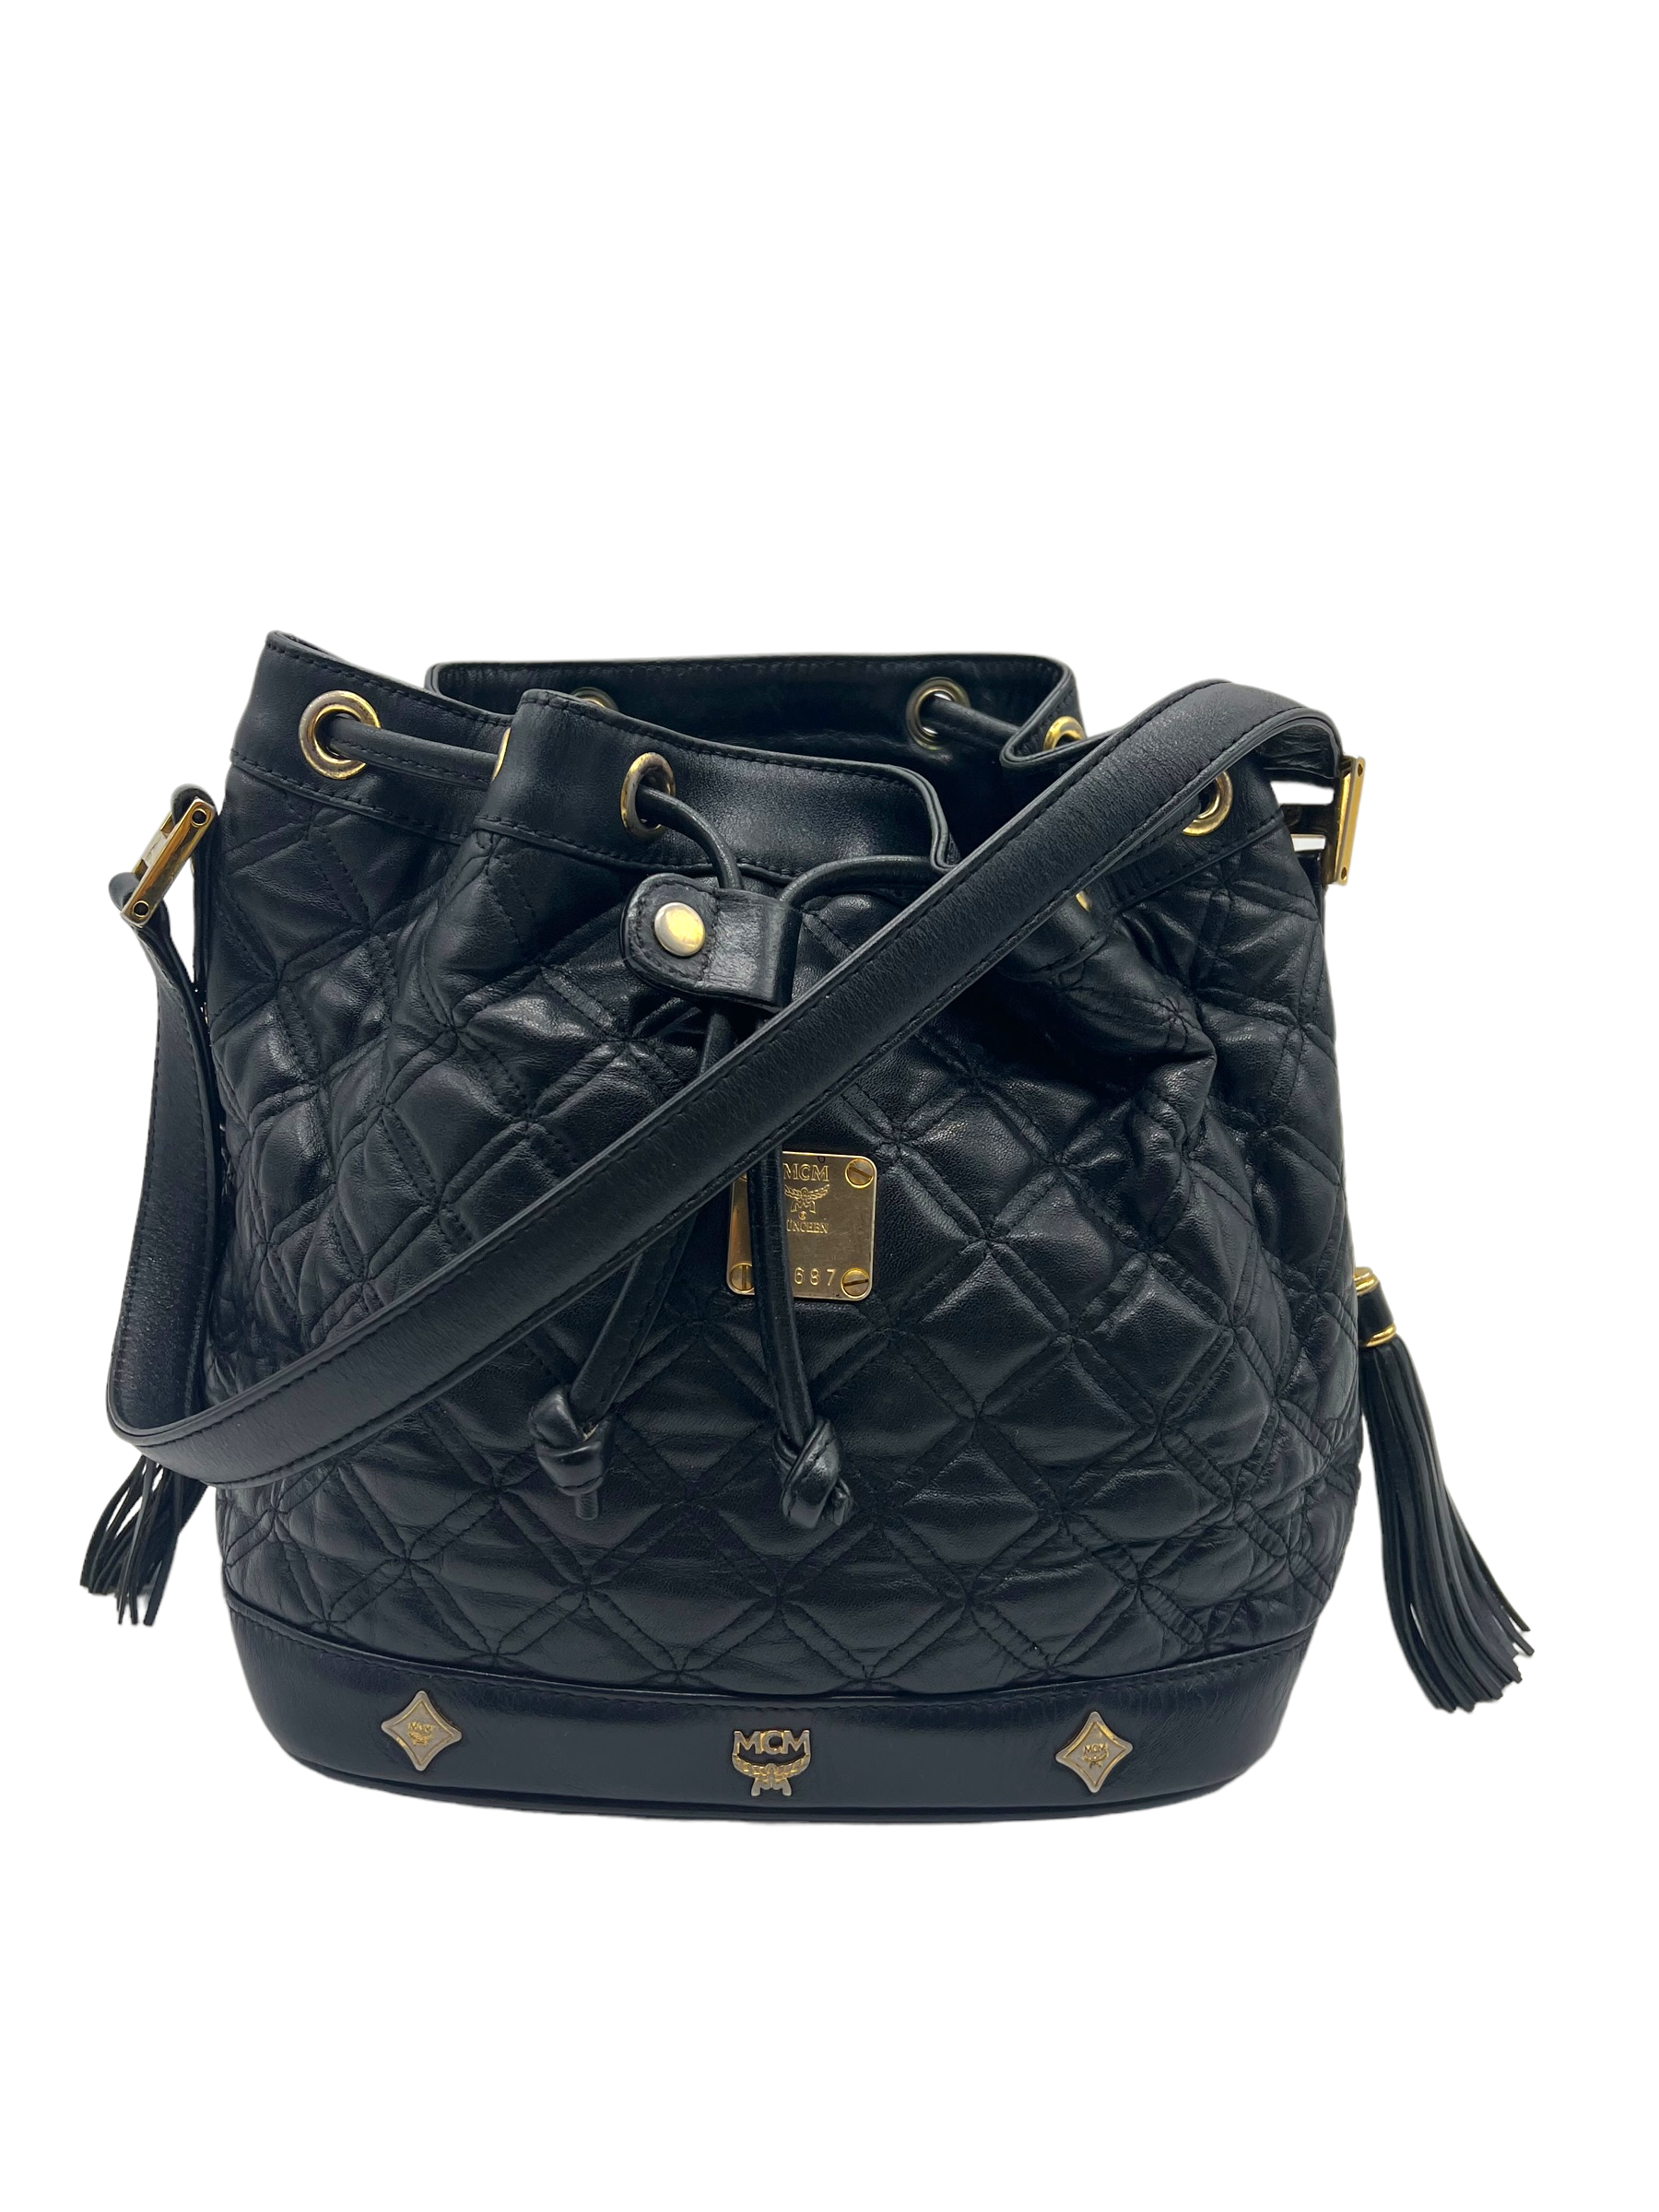 MCM, Bags, Mcm Leather Quilted Small Shoulder Tote Bag